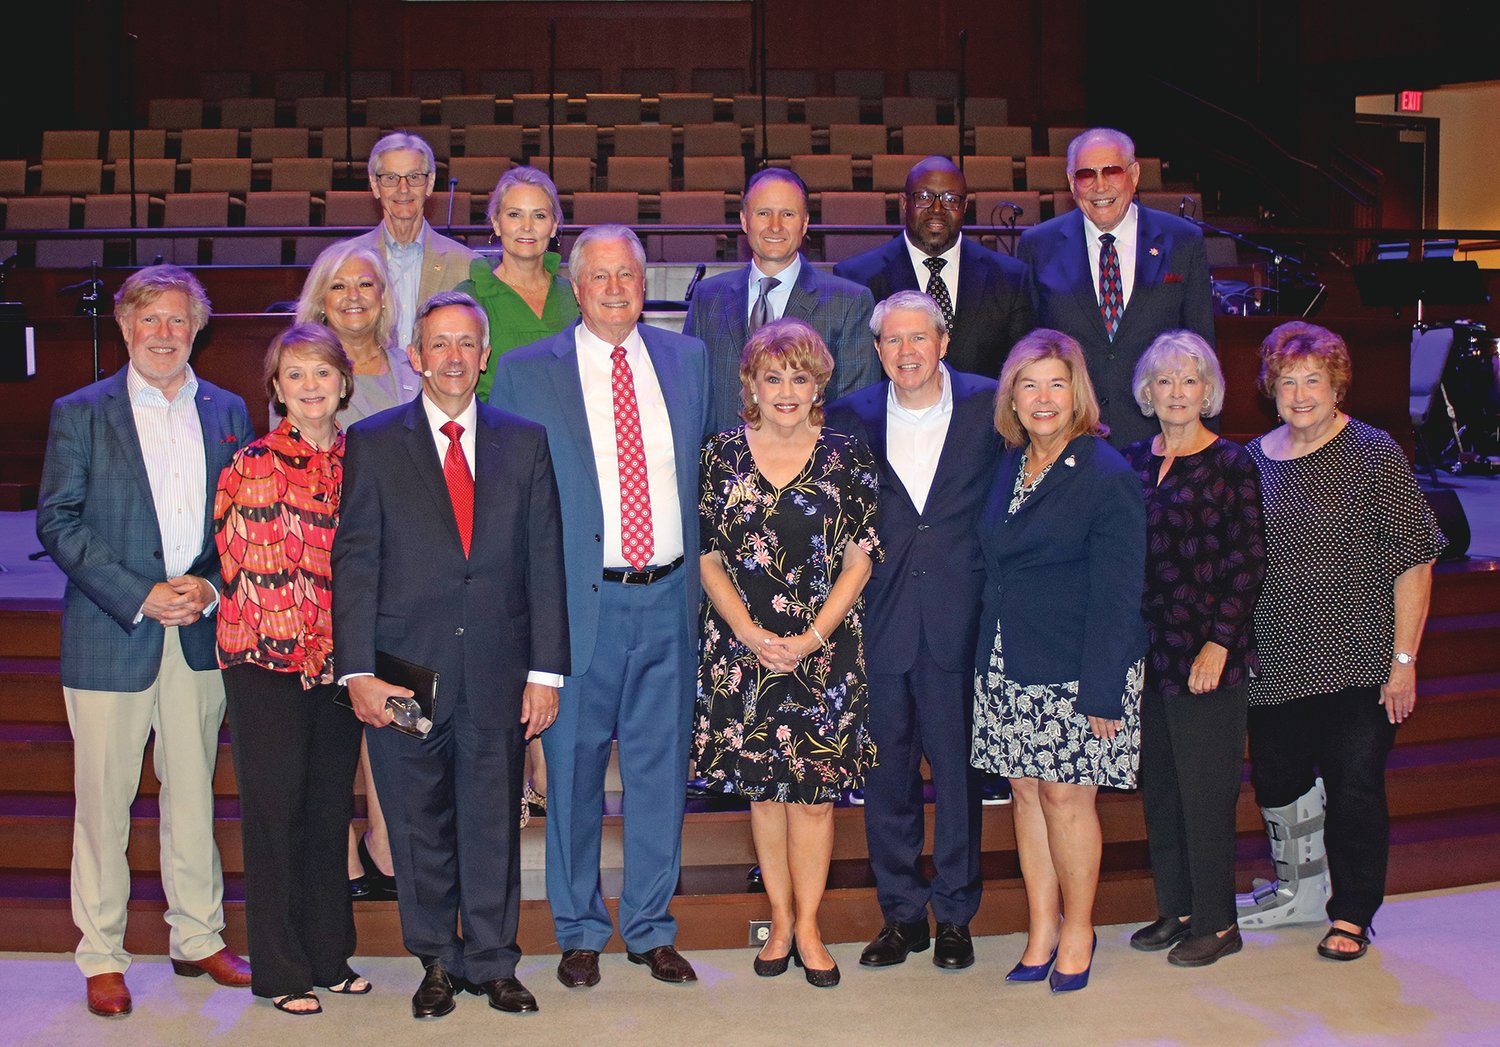 A Call for Prayer in Madison last week at First Baptist Church featured speaker Dr. Robert Jeffress of First Baptist Church in Dallas and singer-songwriter Dickey Lee. Some of those attending included, front row, left to right, Natchez Mayor Dan Gibson, Madison Alderman Janie Jarvis, Dr. Robert Jeffress, Bishop Jerry Dillon Of Parkway Church, Mayor Mary Hawkins Butler, Dr. Bill Hardin of First Baptist Madison, Chancery Judge Cynthia Brewer, Helen Carney, Pat Truesdale; second row, Crystal Springs Mayor Sally Garland, Alderman Guy Bowering, State Rep. Jill Ford, Rev. Jason Dillon of Parkway Church, Pastor Seven Brooks of Fairview M.B. Church and Pastor Bobby Hood.